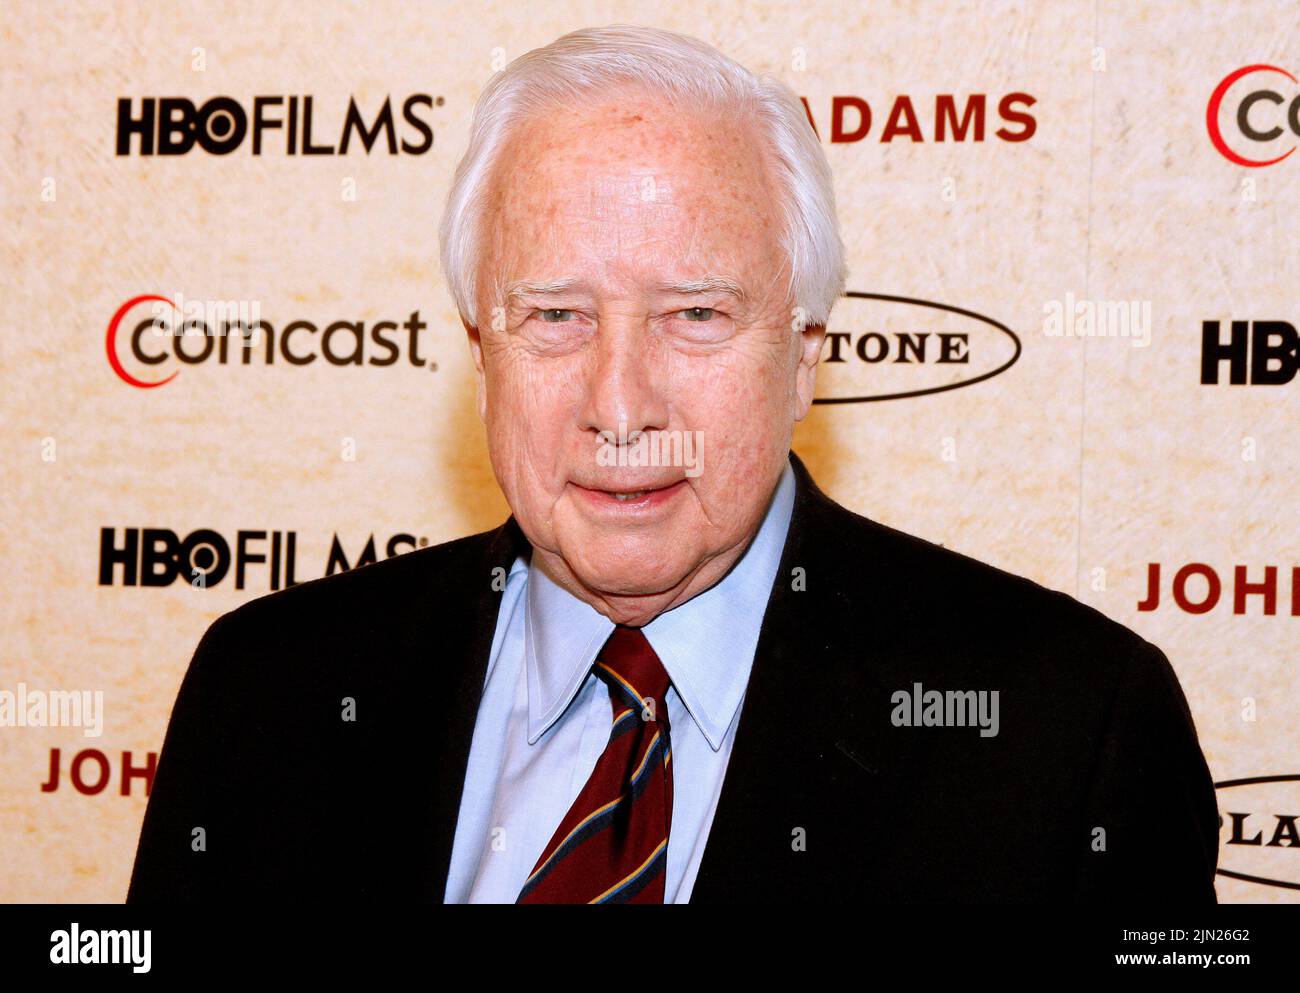 **FILE PHOTO** David McCullough Has Passed Away David McCullough, author of the book John Adams is pictured at the screening of John Adams at the National Constitution Center in Philadelphia on March 11, 2008.Credit: Scott Weiner/MediaPunch Stock Photo